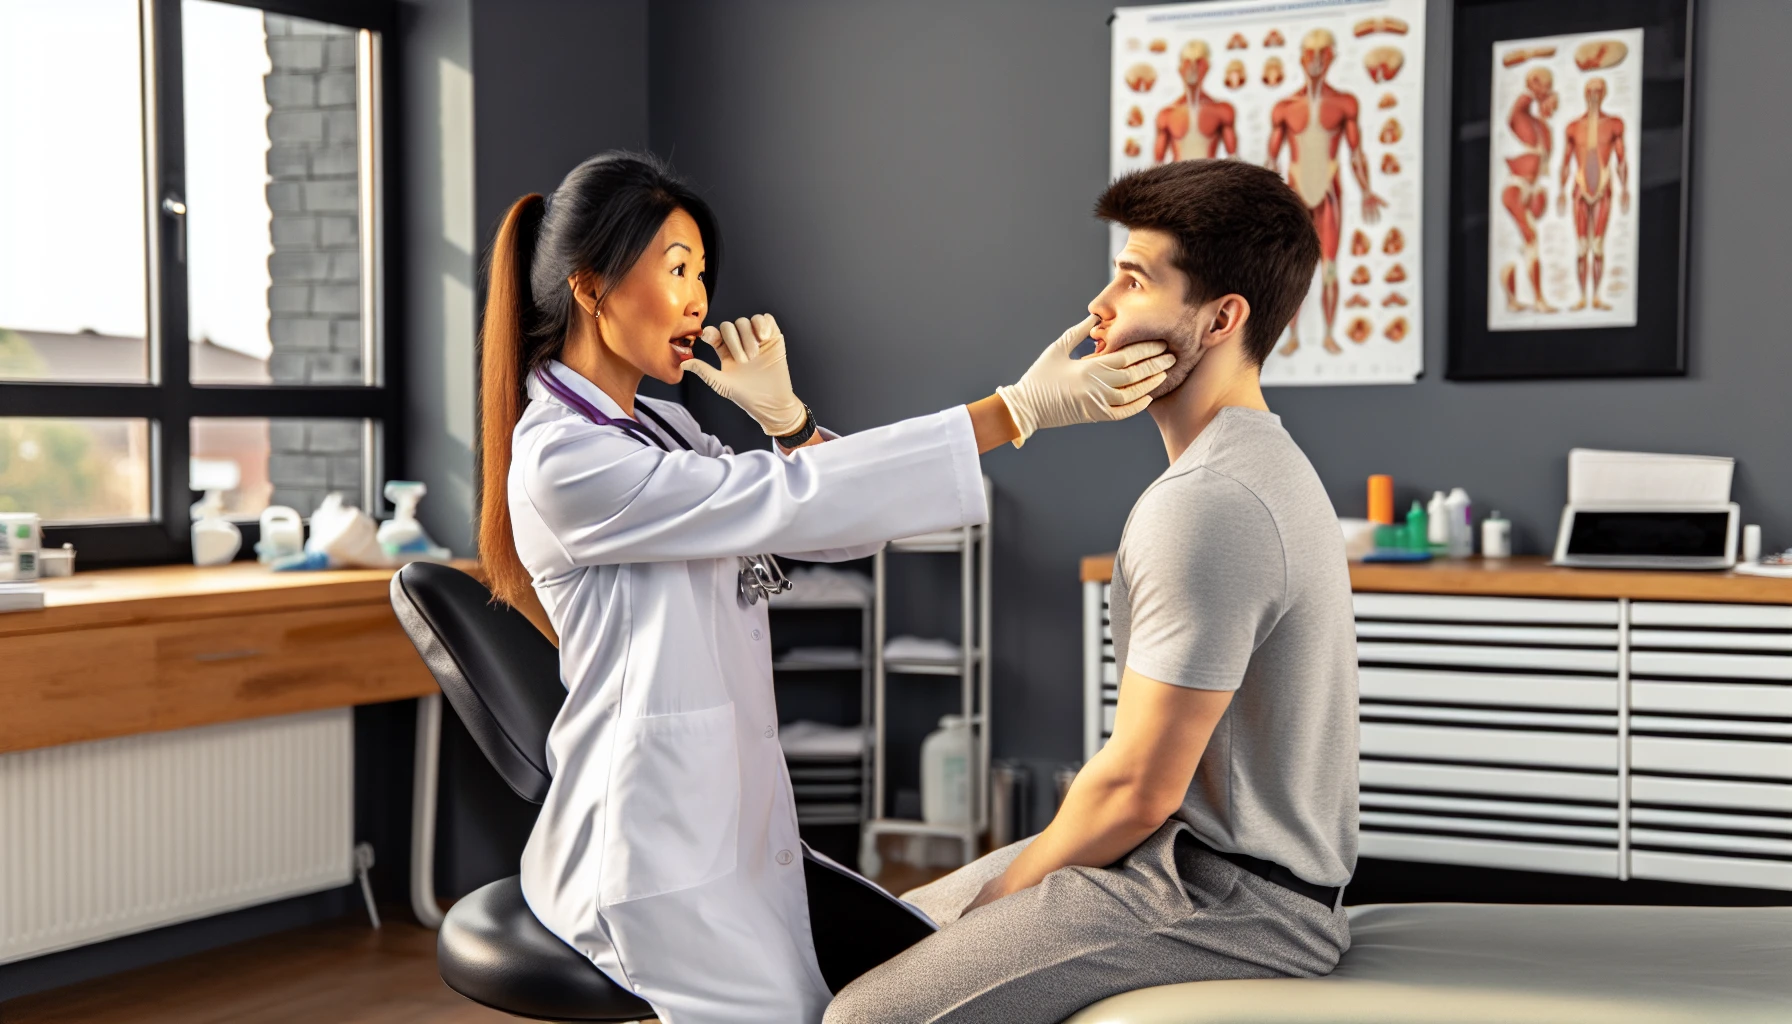 Physical therapist demonstrating jaw exercises for TMJ treatment